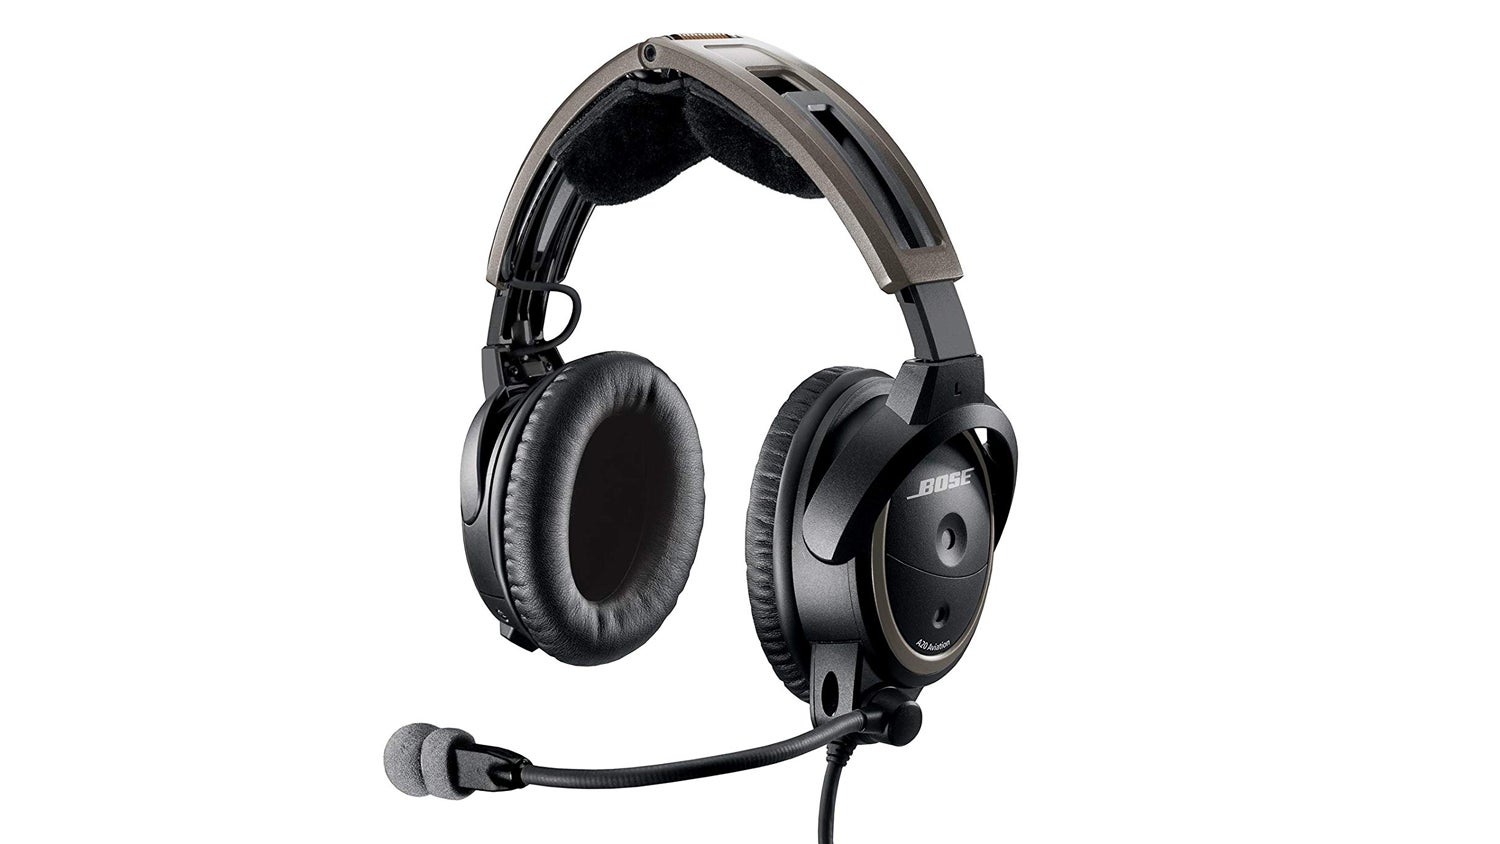 Three Reasons To Buy Your Next Aviation Headset